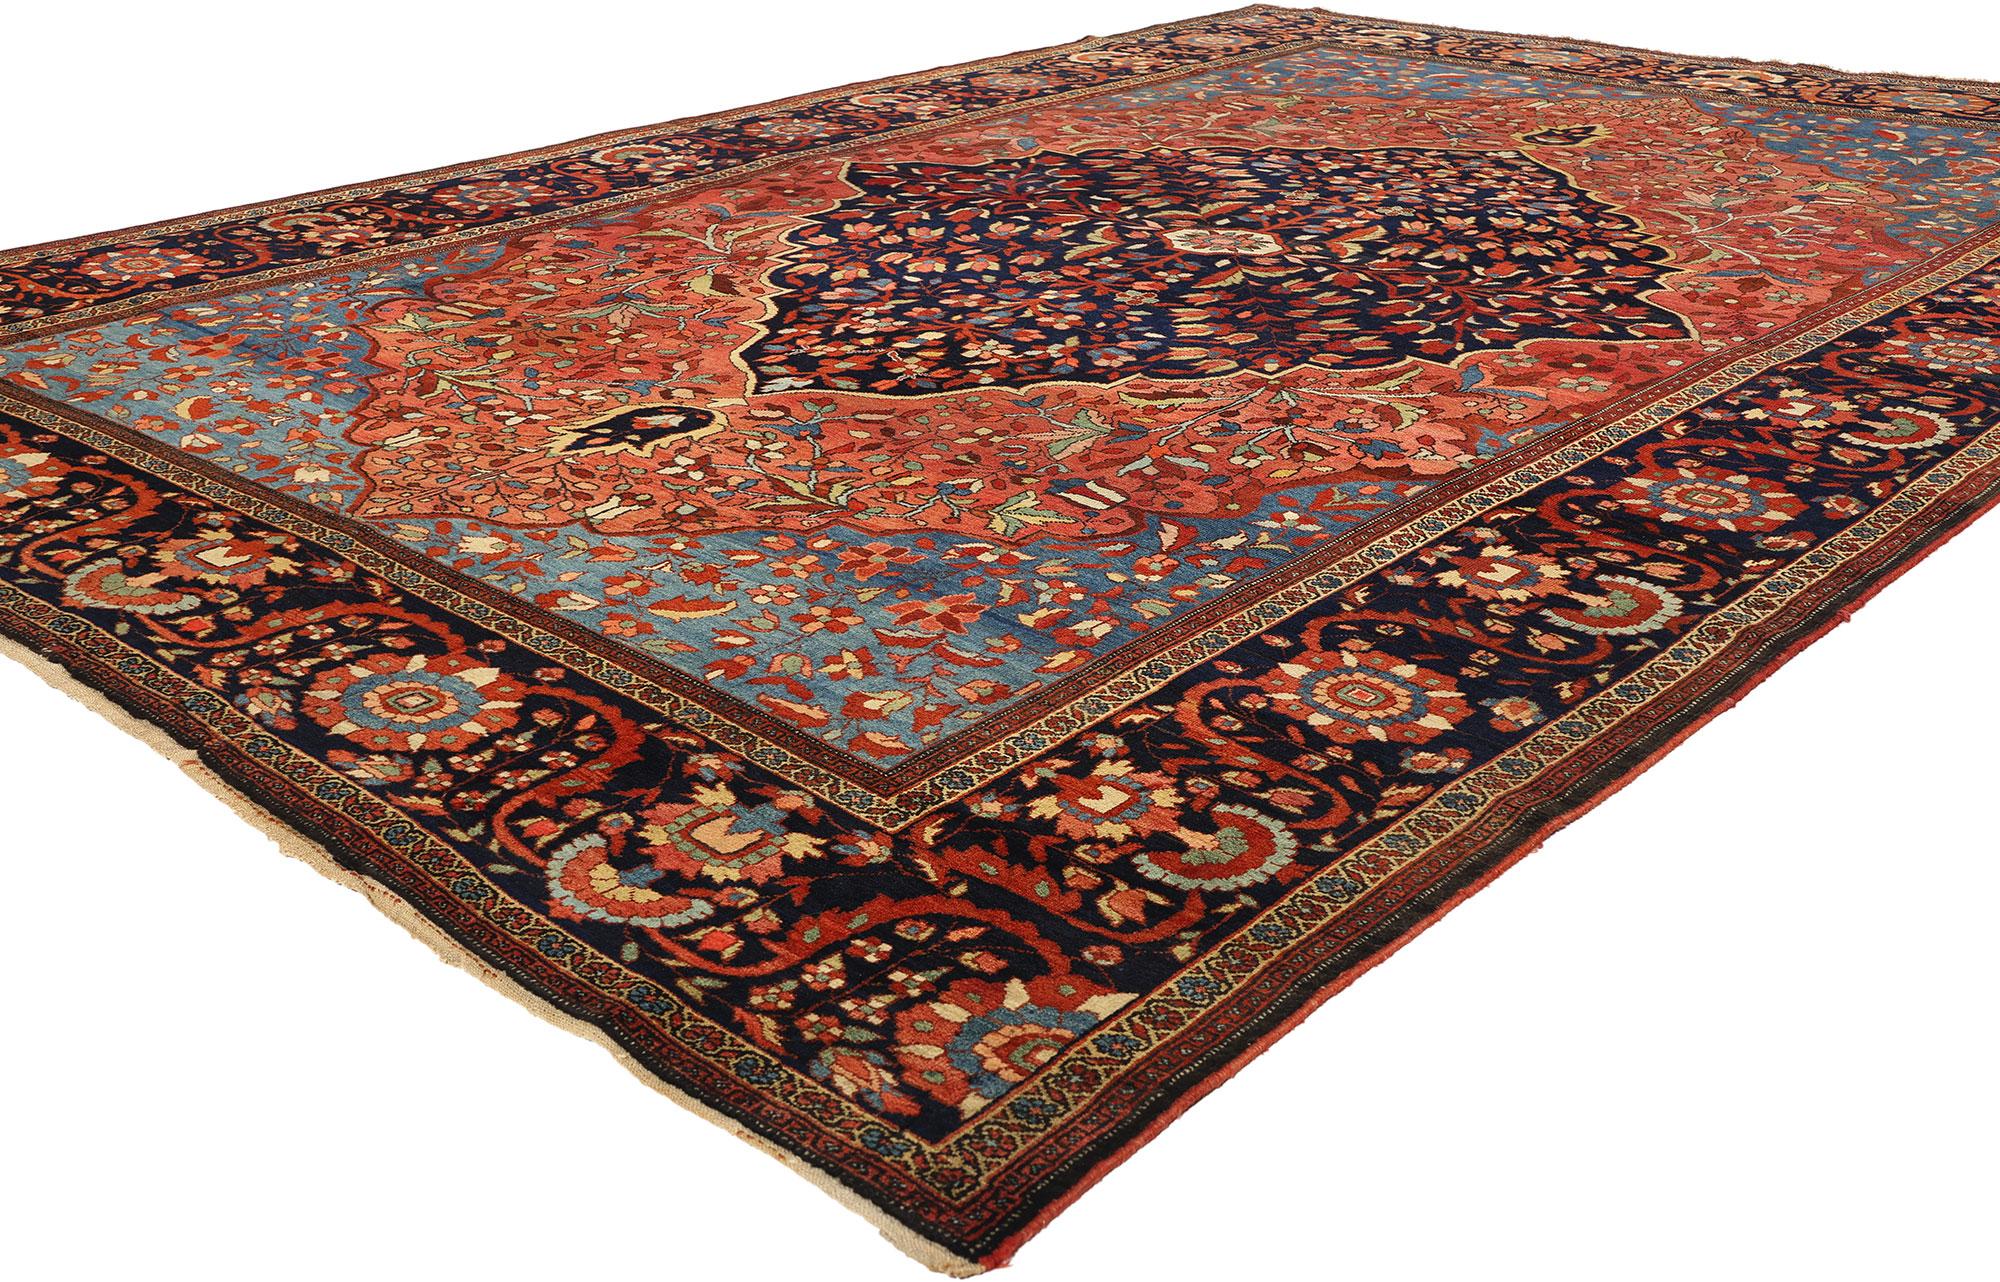 53478 Antique Persian Sarouk Farahan Rug, 08'04 x 11'09. Sarouk Farahan rugs, hailing from the Farahan region in central Iran, are celebrated for their impeccable craftsmanship, elaborate designs, and lively hues. Crafted through the meticulous